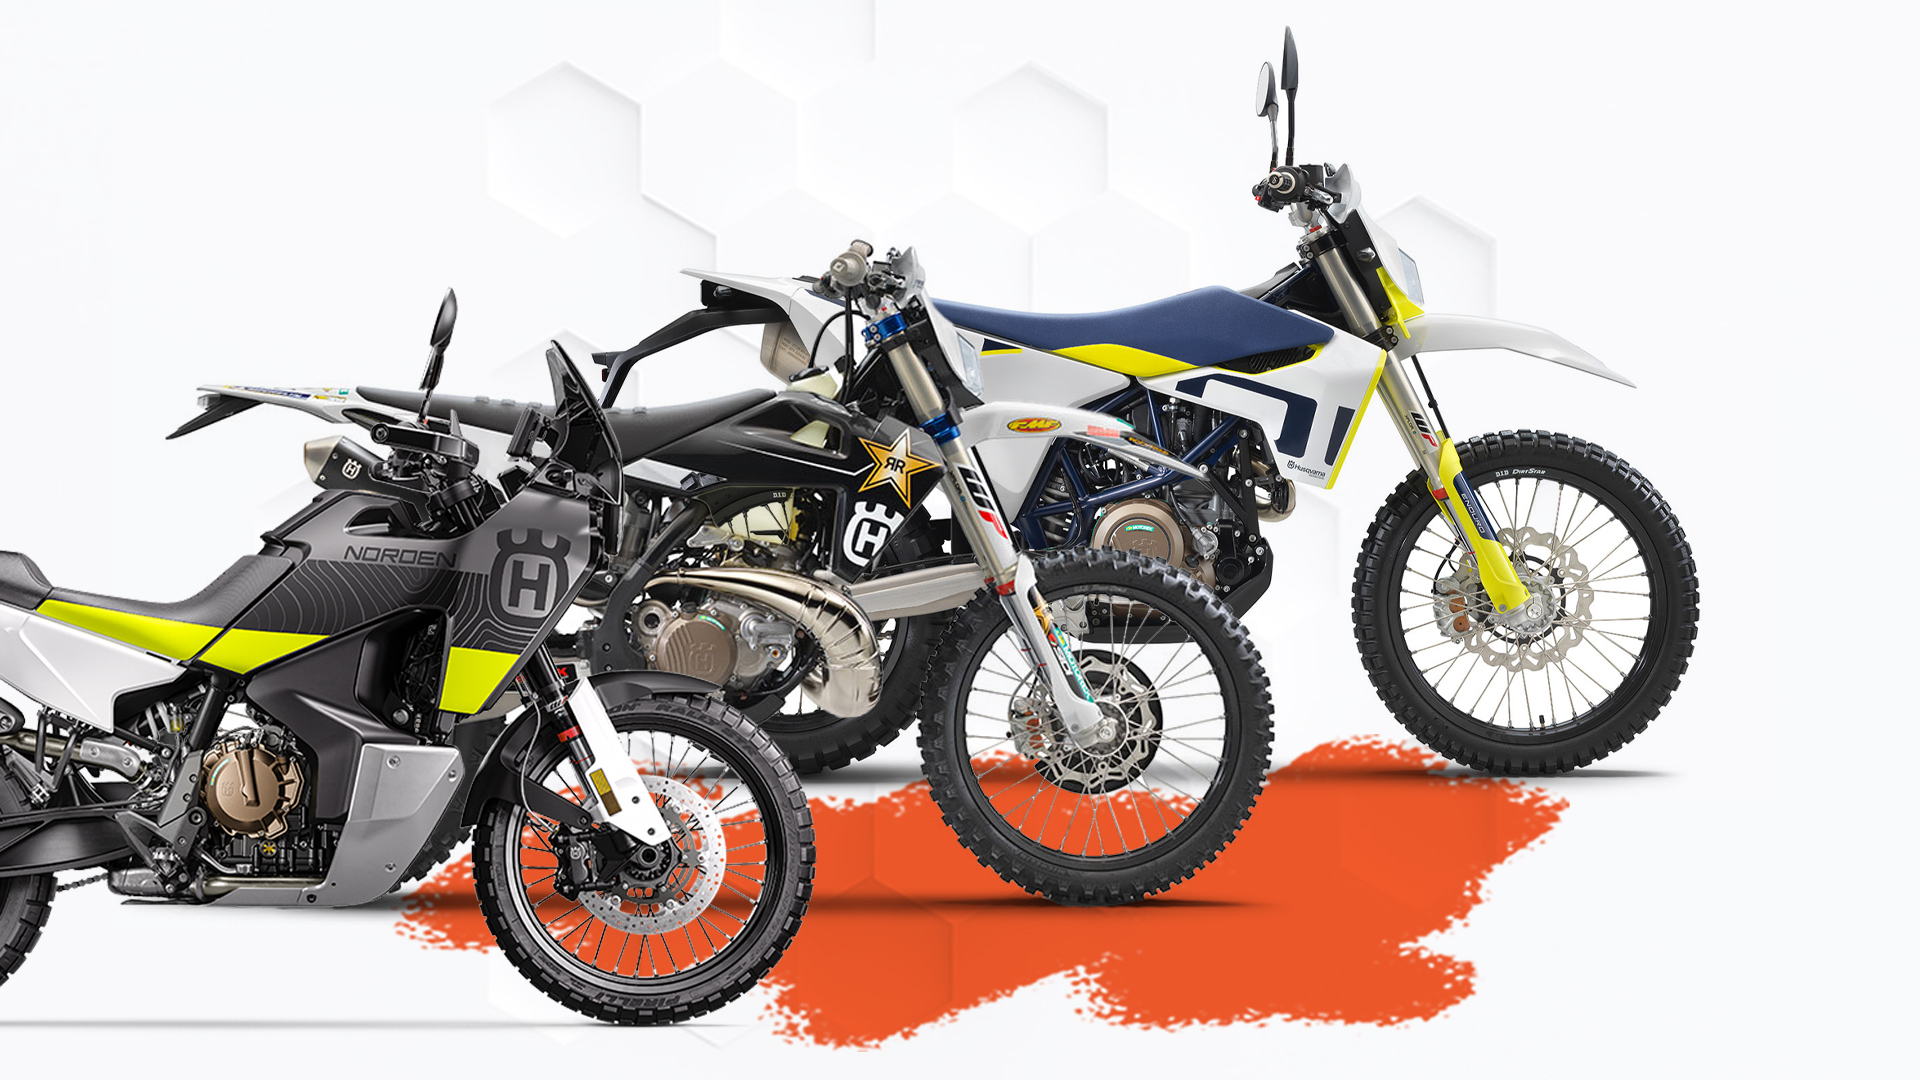 The 2022 Husqvarna Motorcycle Lineup + Our Take On Each Model